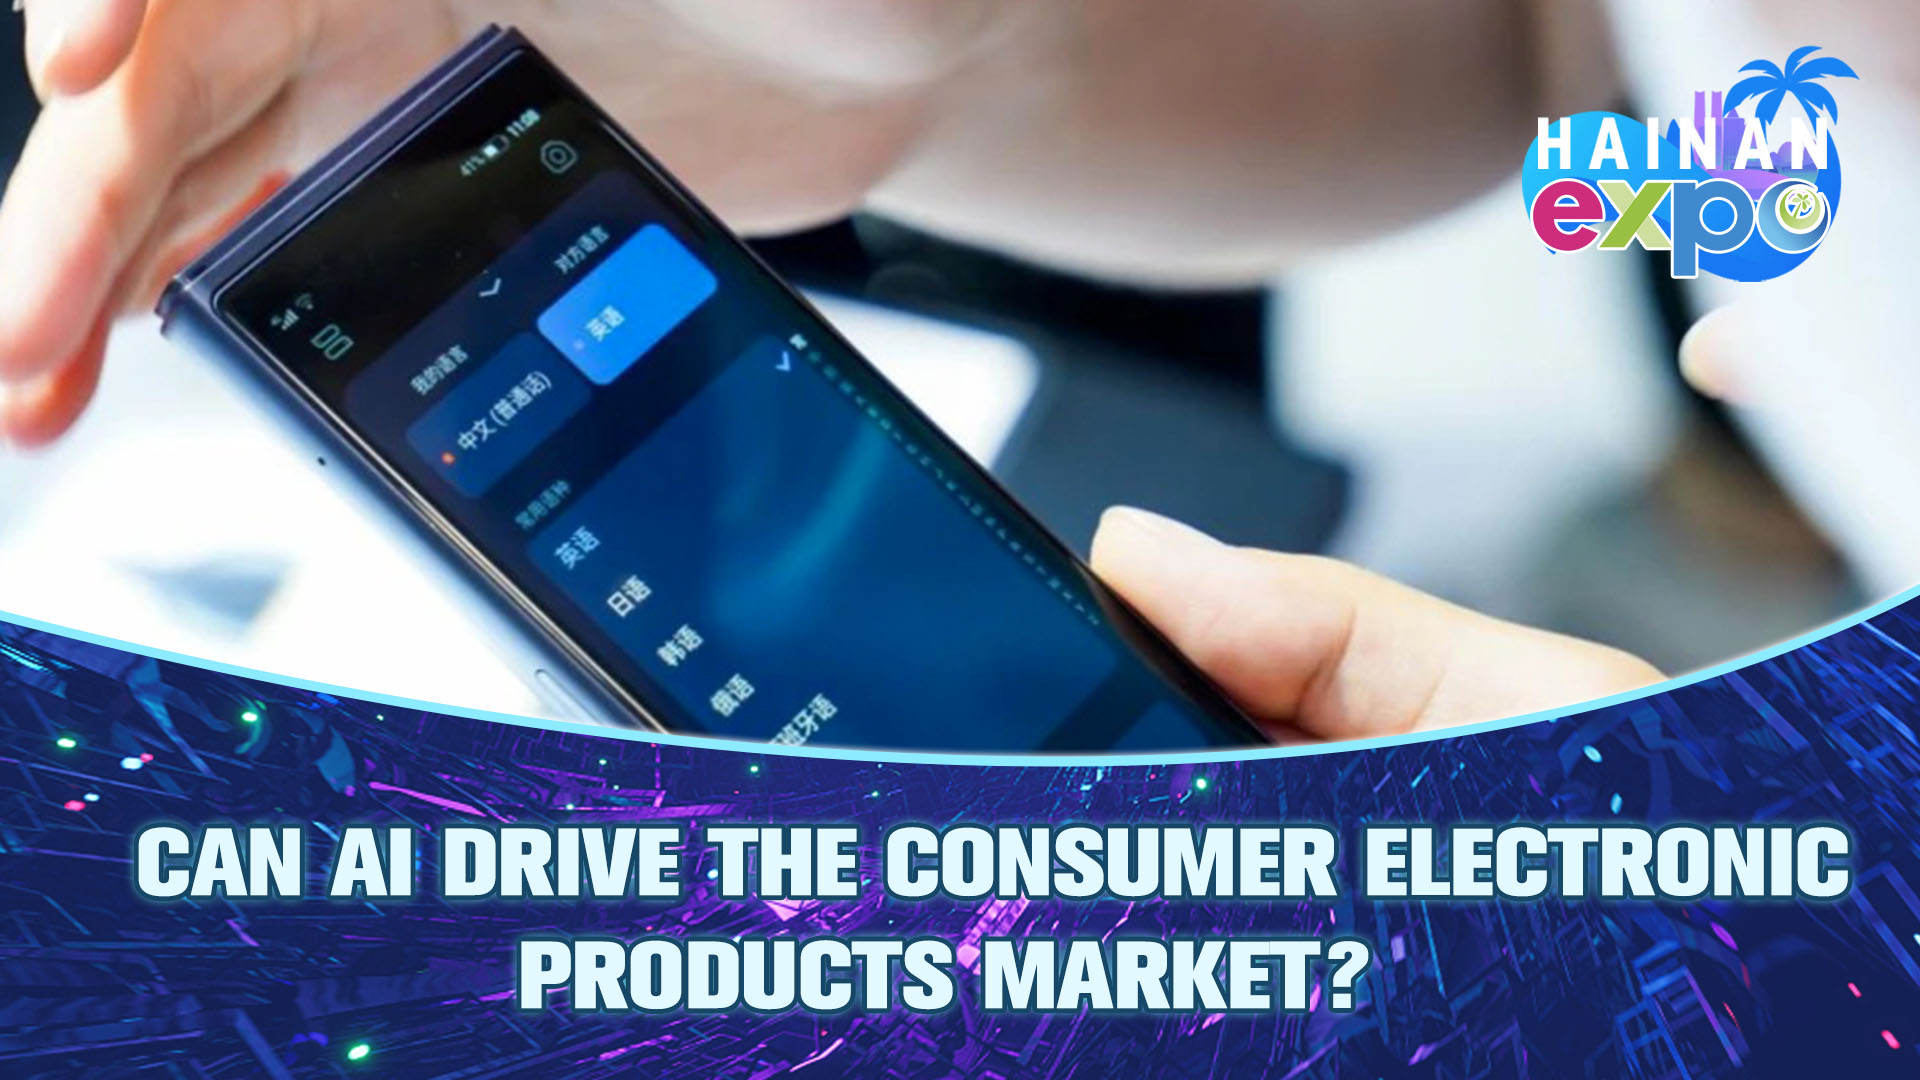 Hainan Expo: Can AI drive the 2023 consumer electronic products market?